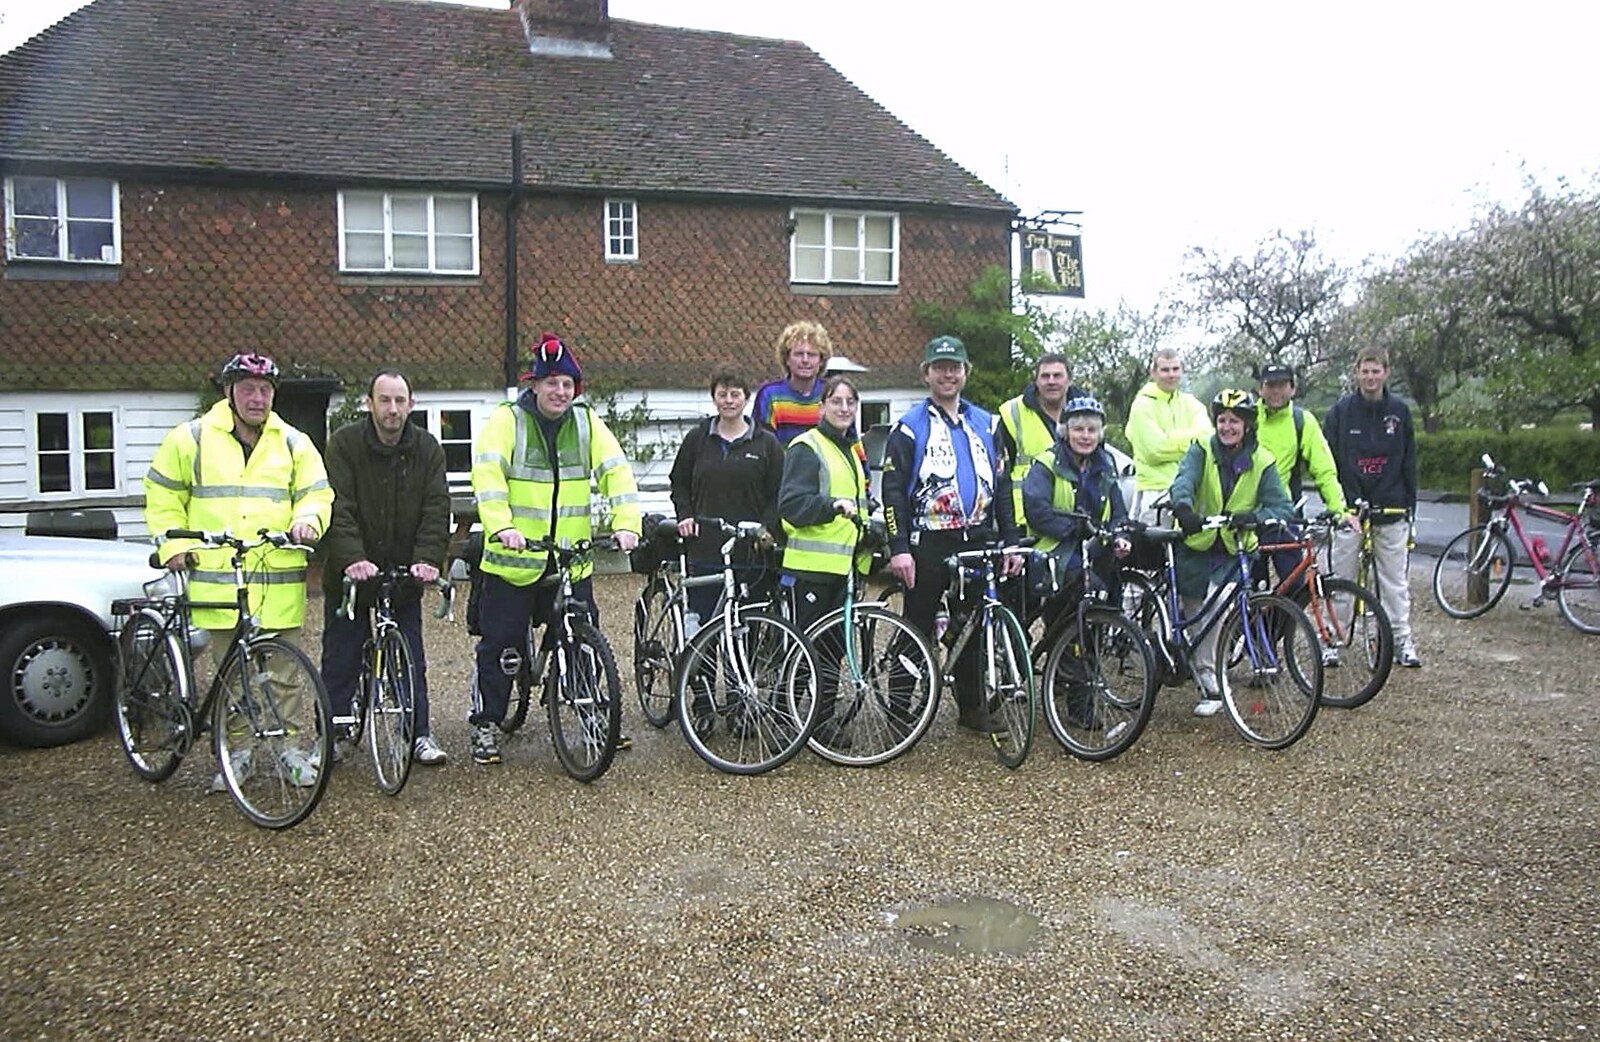 A group photo outside the pub, which is closed from The BSCC Annual Bike Ride, Lenham, Kent - 8th May 2004